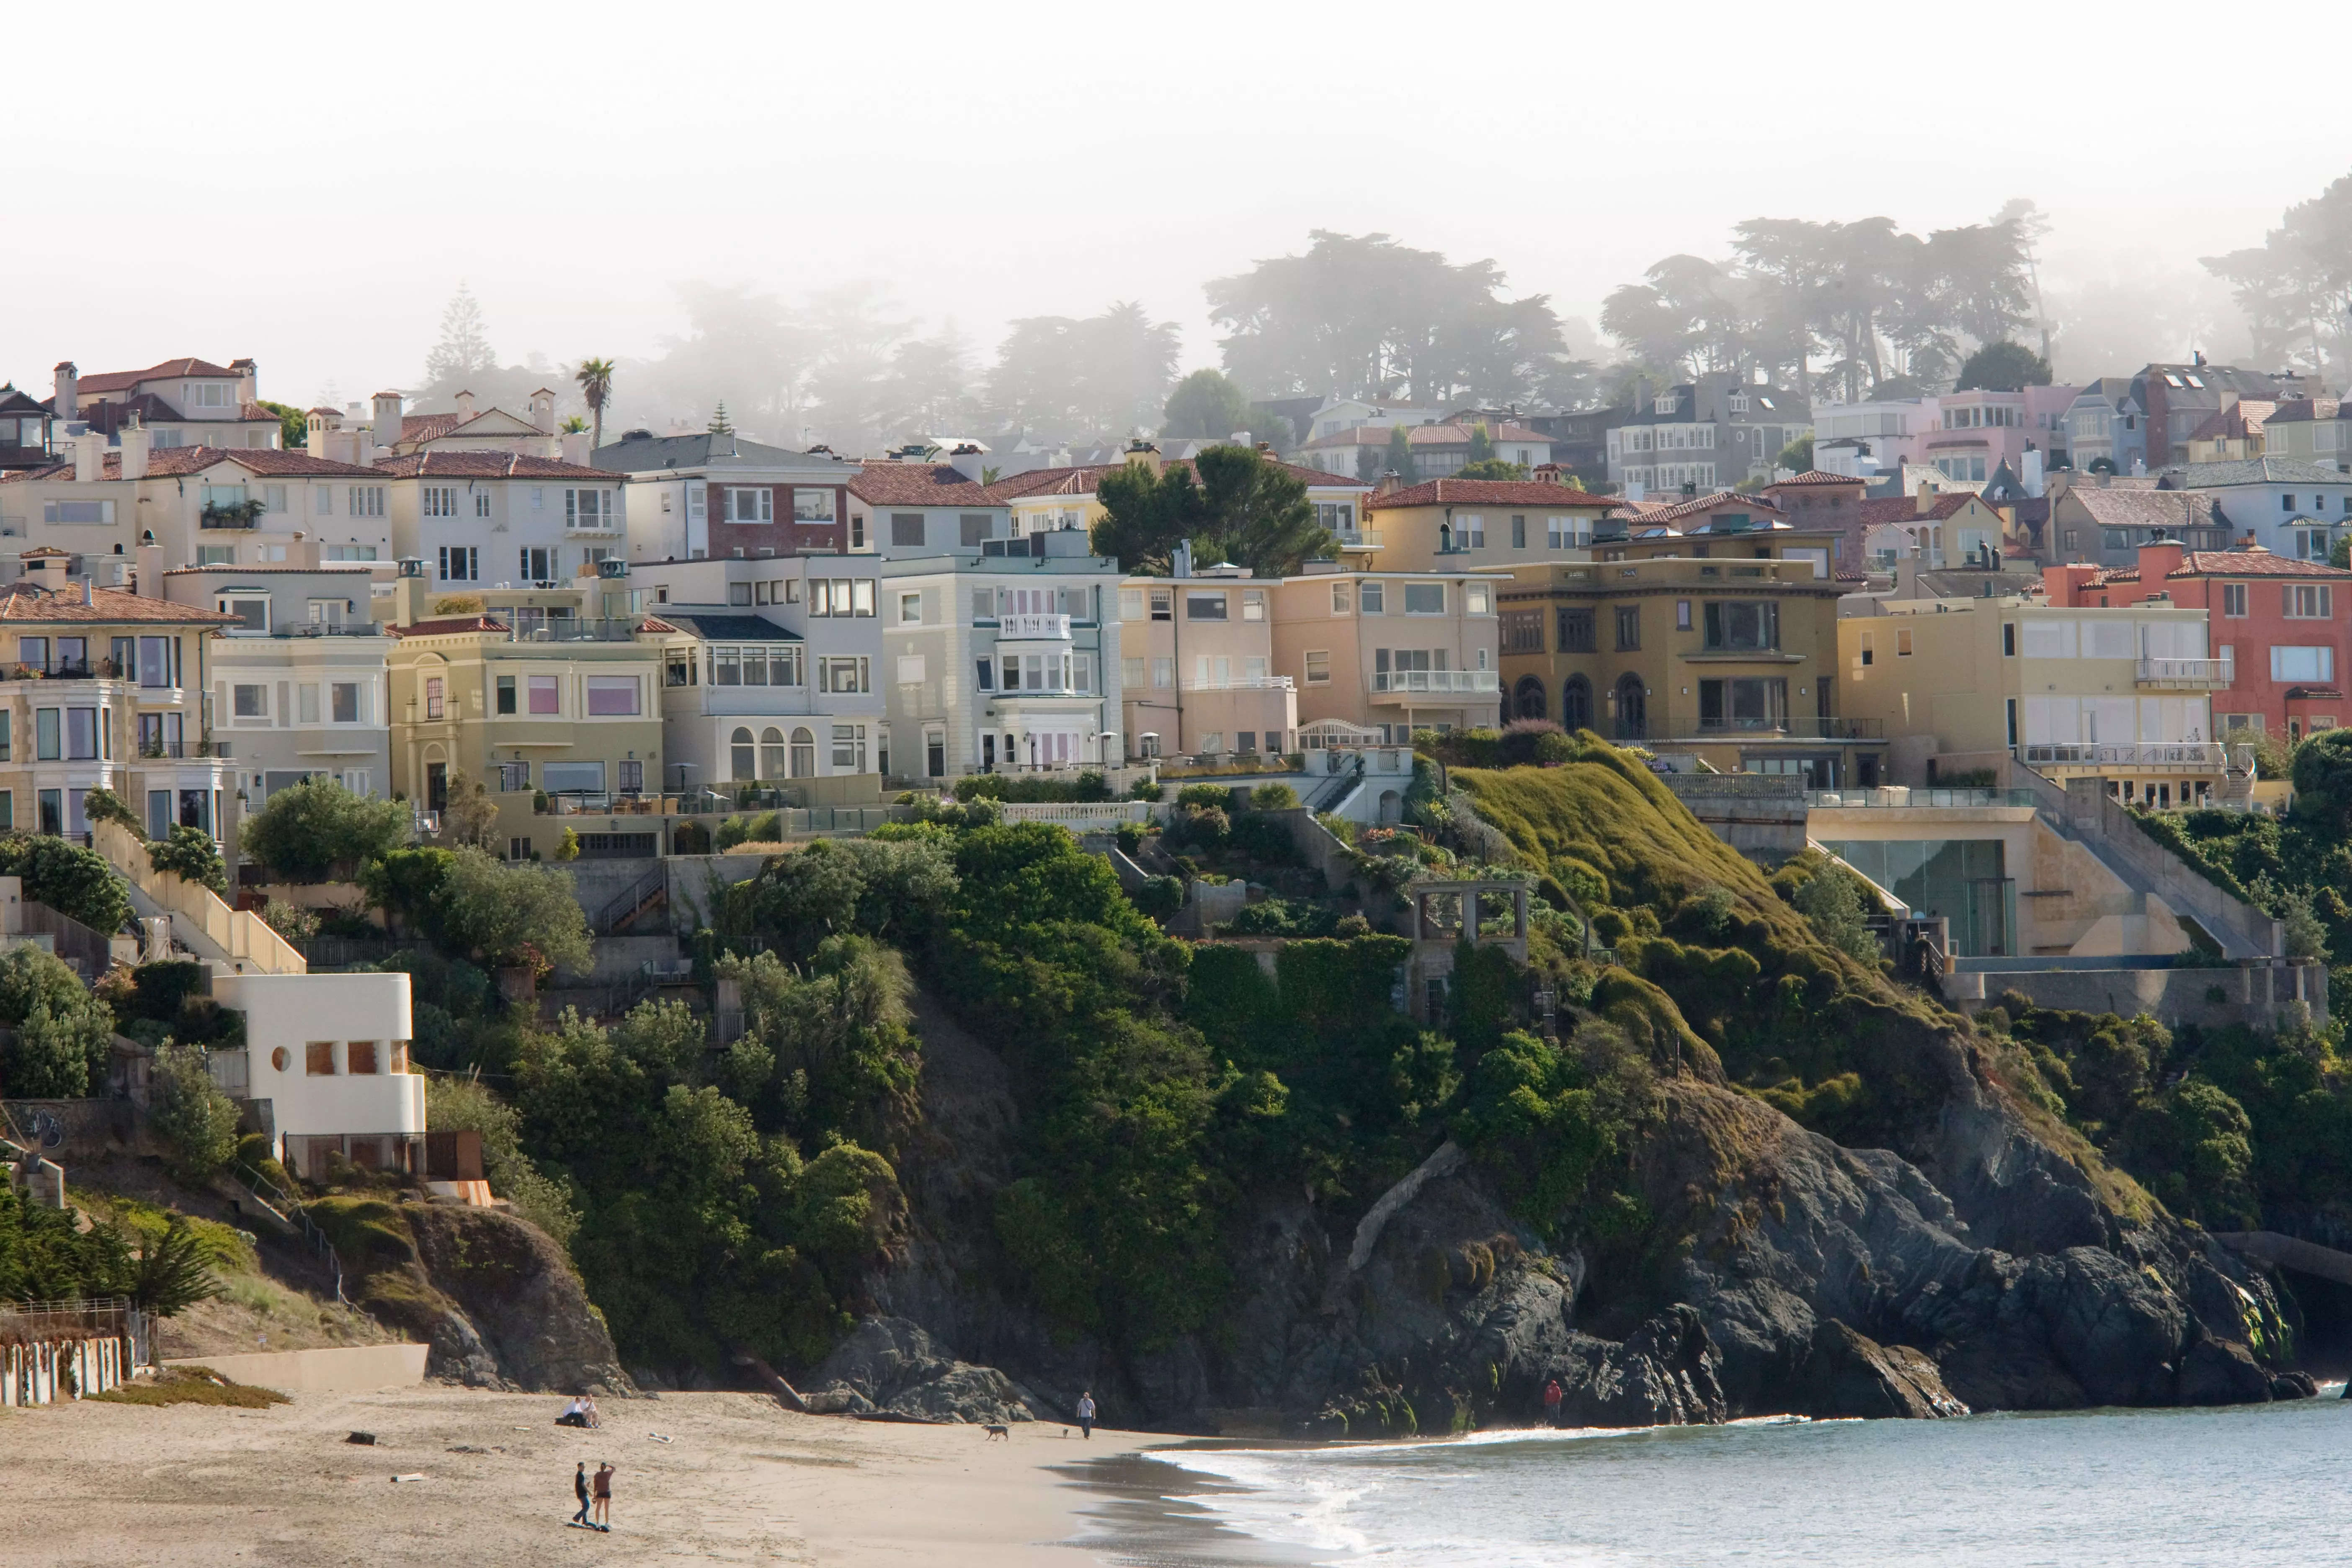 Rows of pastel homes on a beach overlooking a cliff